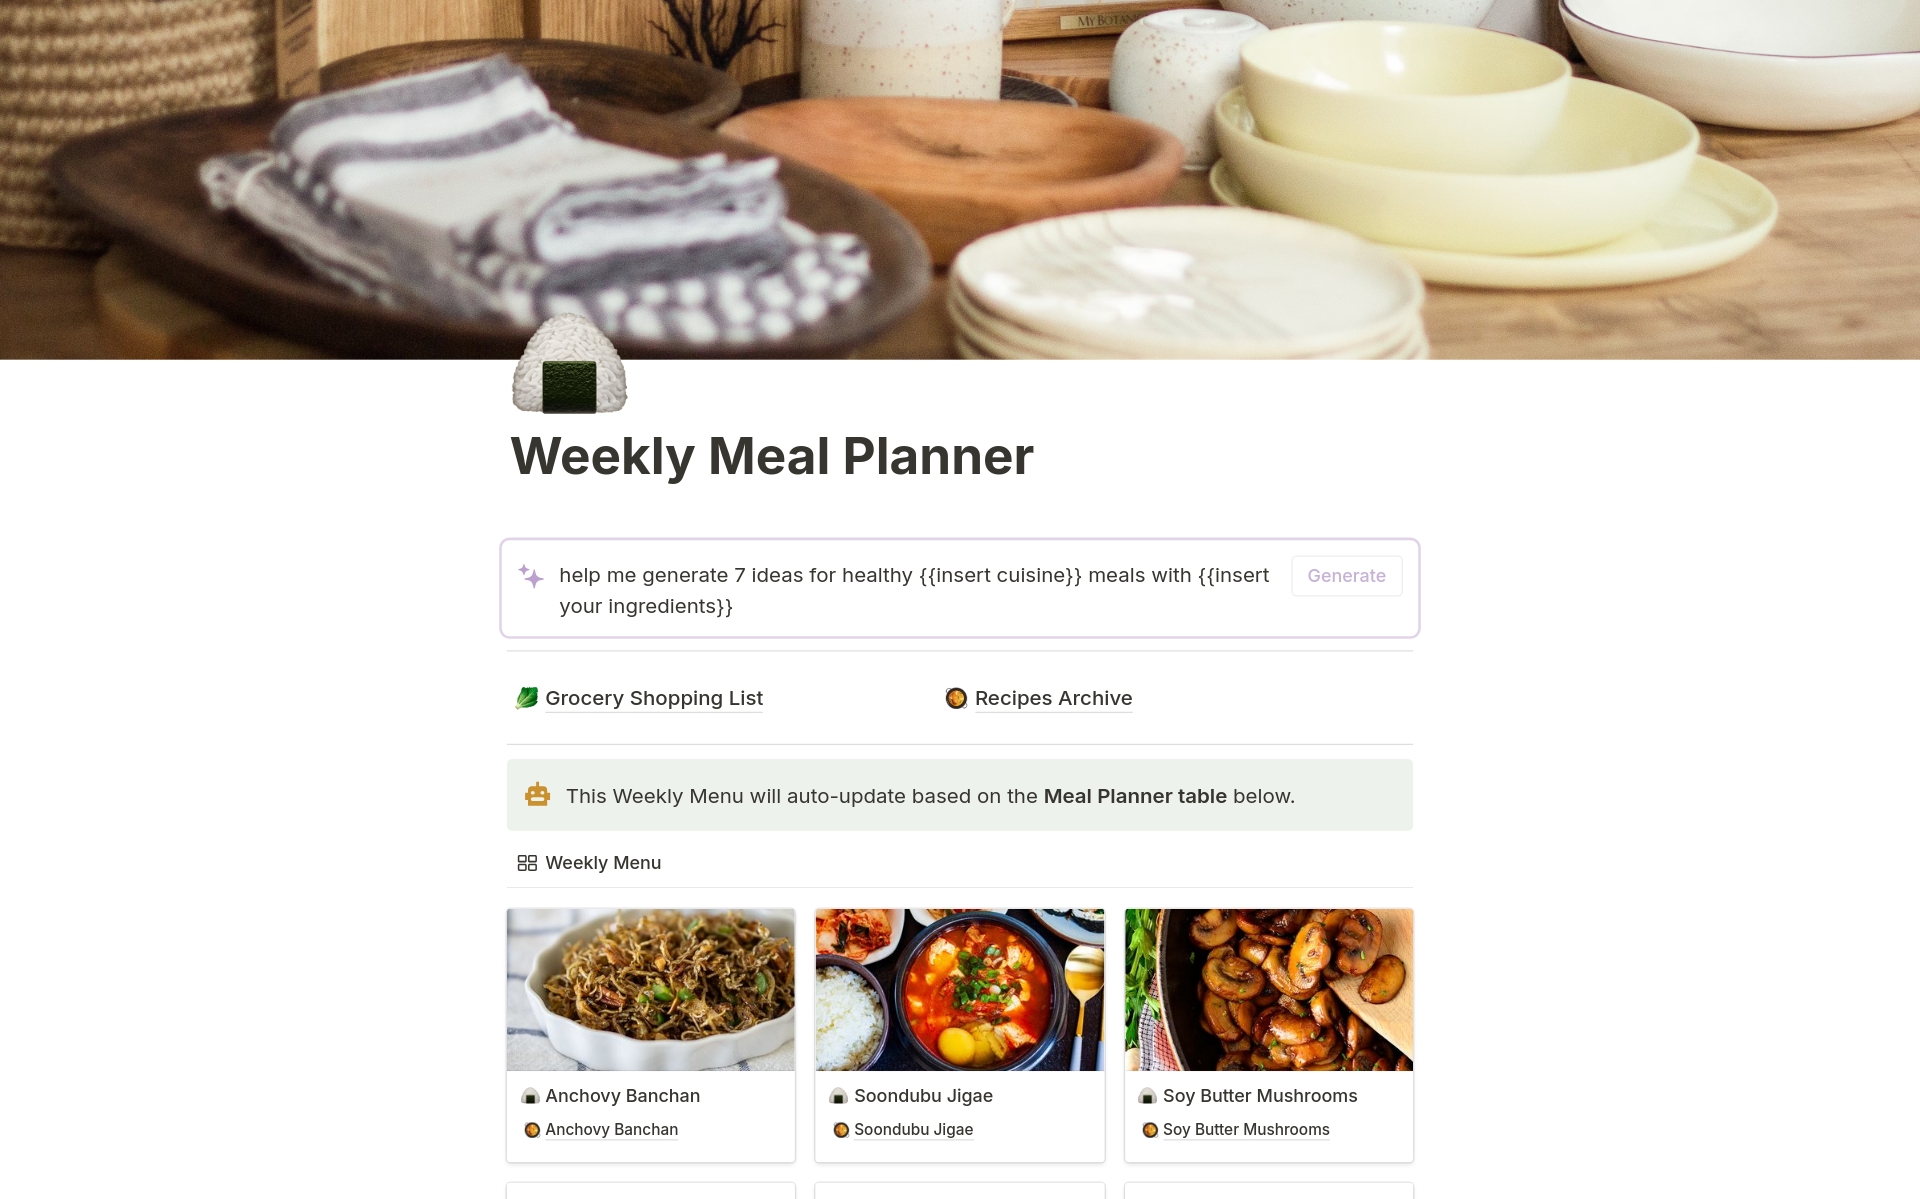 Weekly Meal Planner - with AI and automations님의 템플릿 미리보기